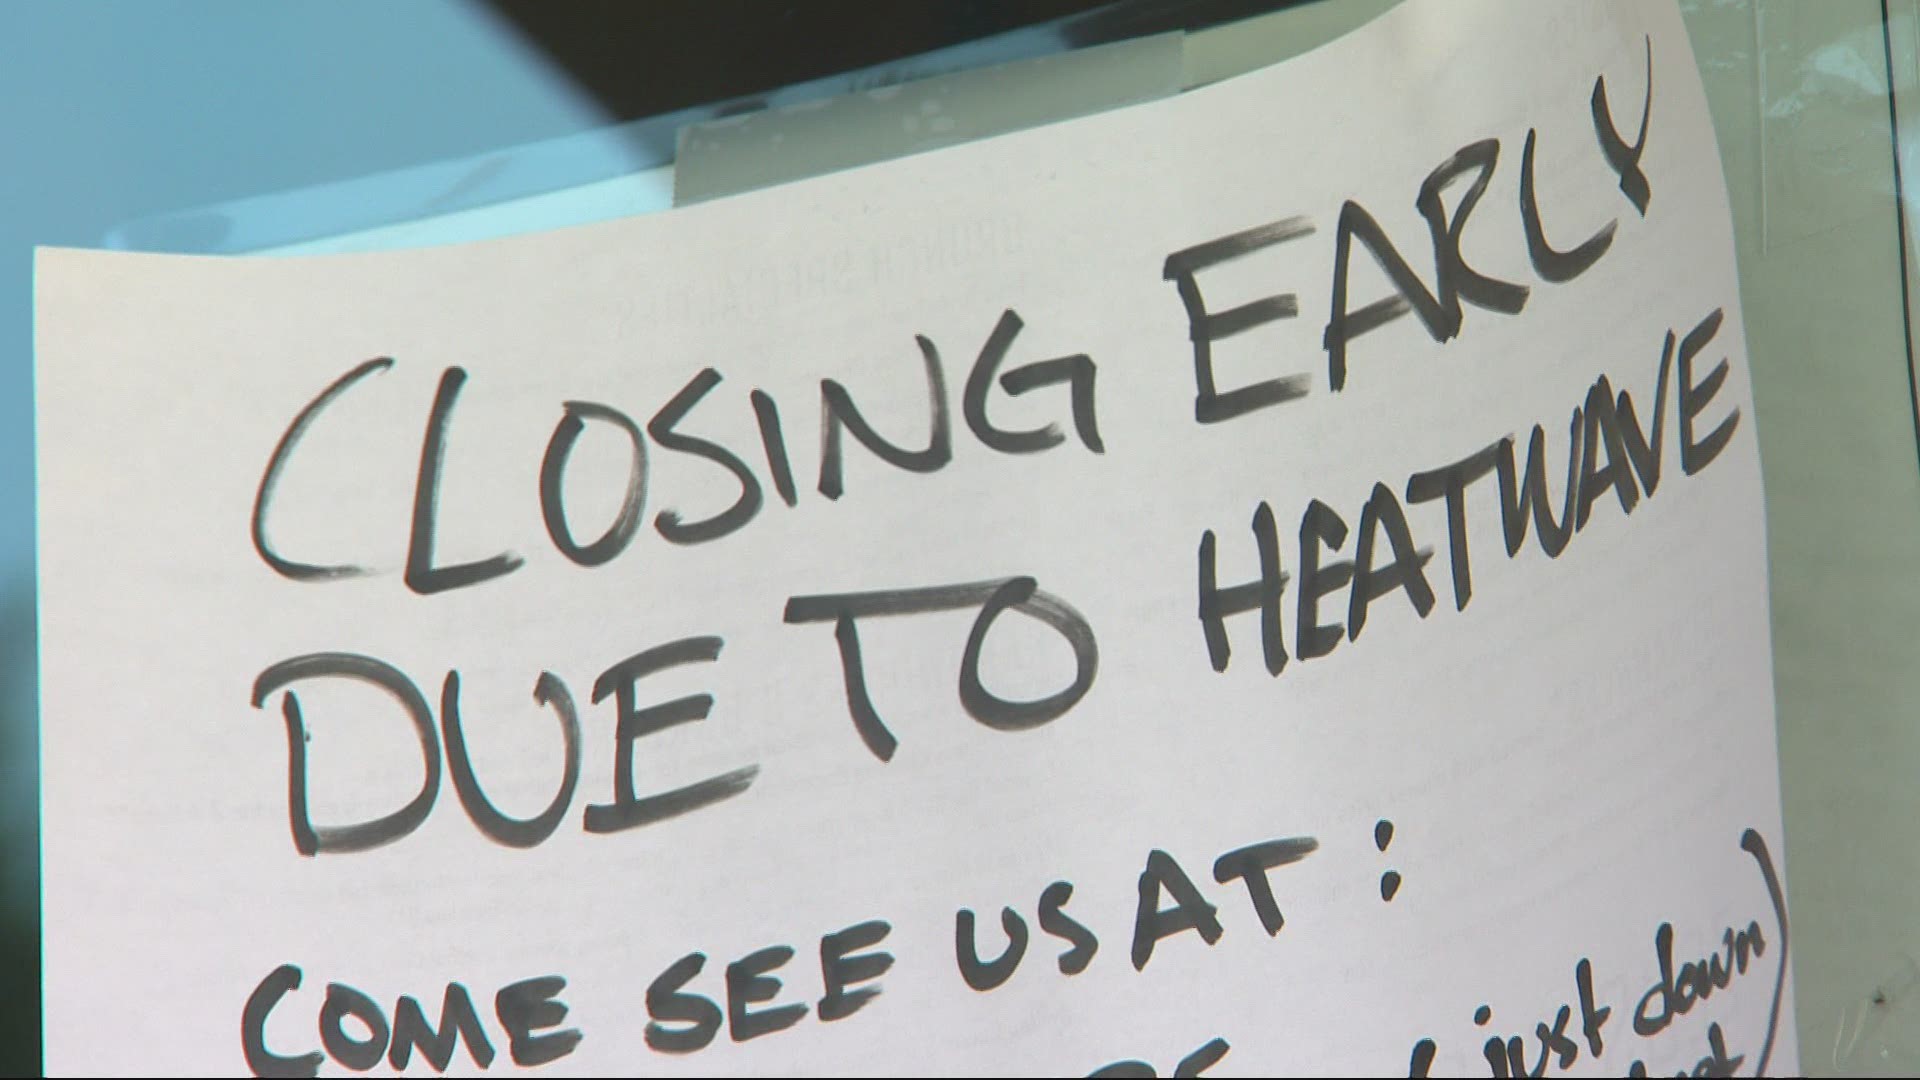 Portland set new heat records Saturday and Sunday and is expected to do so again Monday. Here's Cristin Severance on how it's impacting people and businesses.